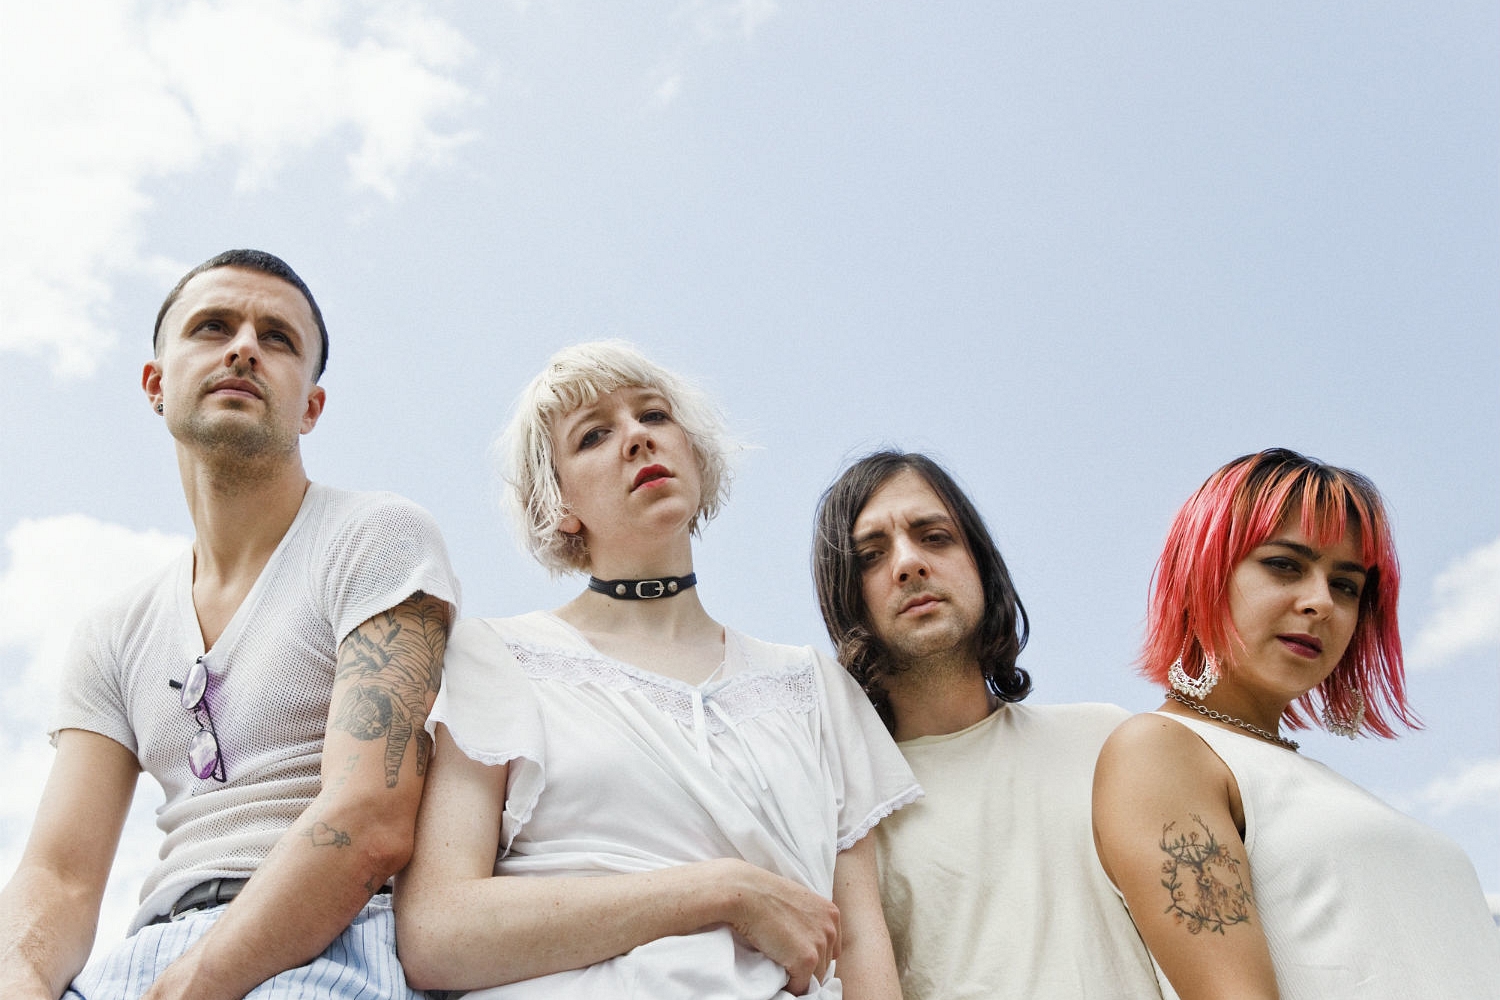 Dilly Dally’s Katie Monks on how they almost broke up before the release of new album ‘Heaven’: “It felt like we were over…”